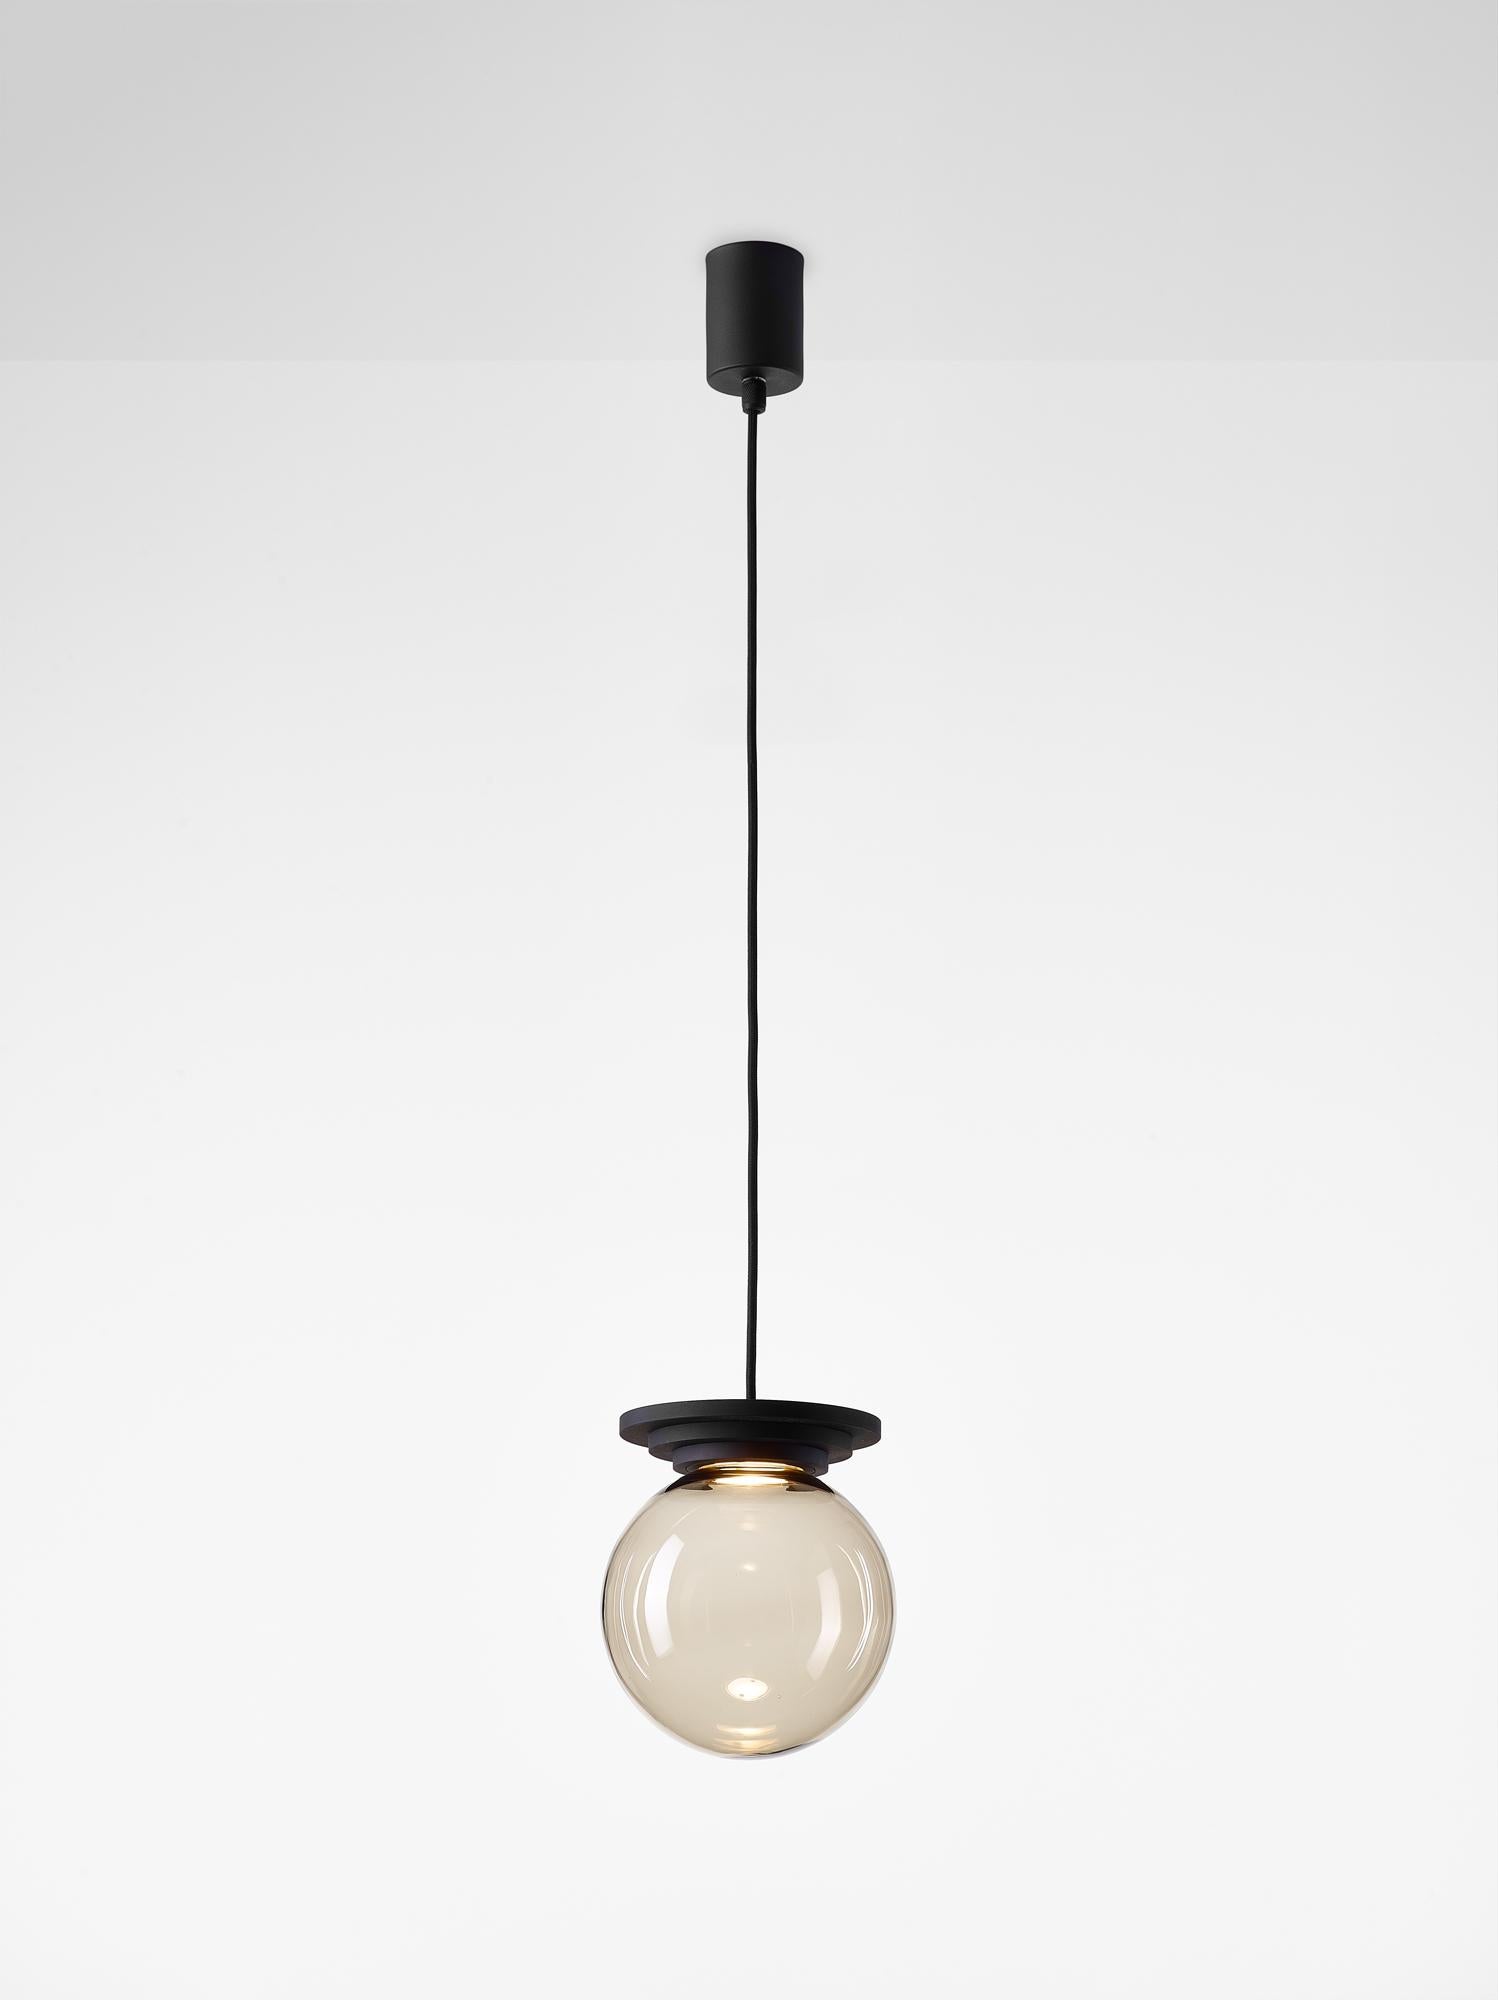 Black Stratos ball pendant light by Dechem Studio
Dimensions: D 18 x H 20 cm
Materials: Aluminum, Glass.
Also available: Different colours available,

Different shapes of capsules and spheres contrast with anodized alloy fixtures, creating a